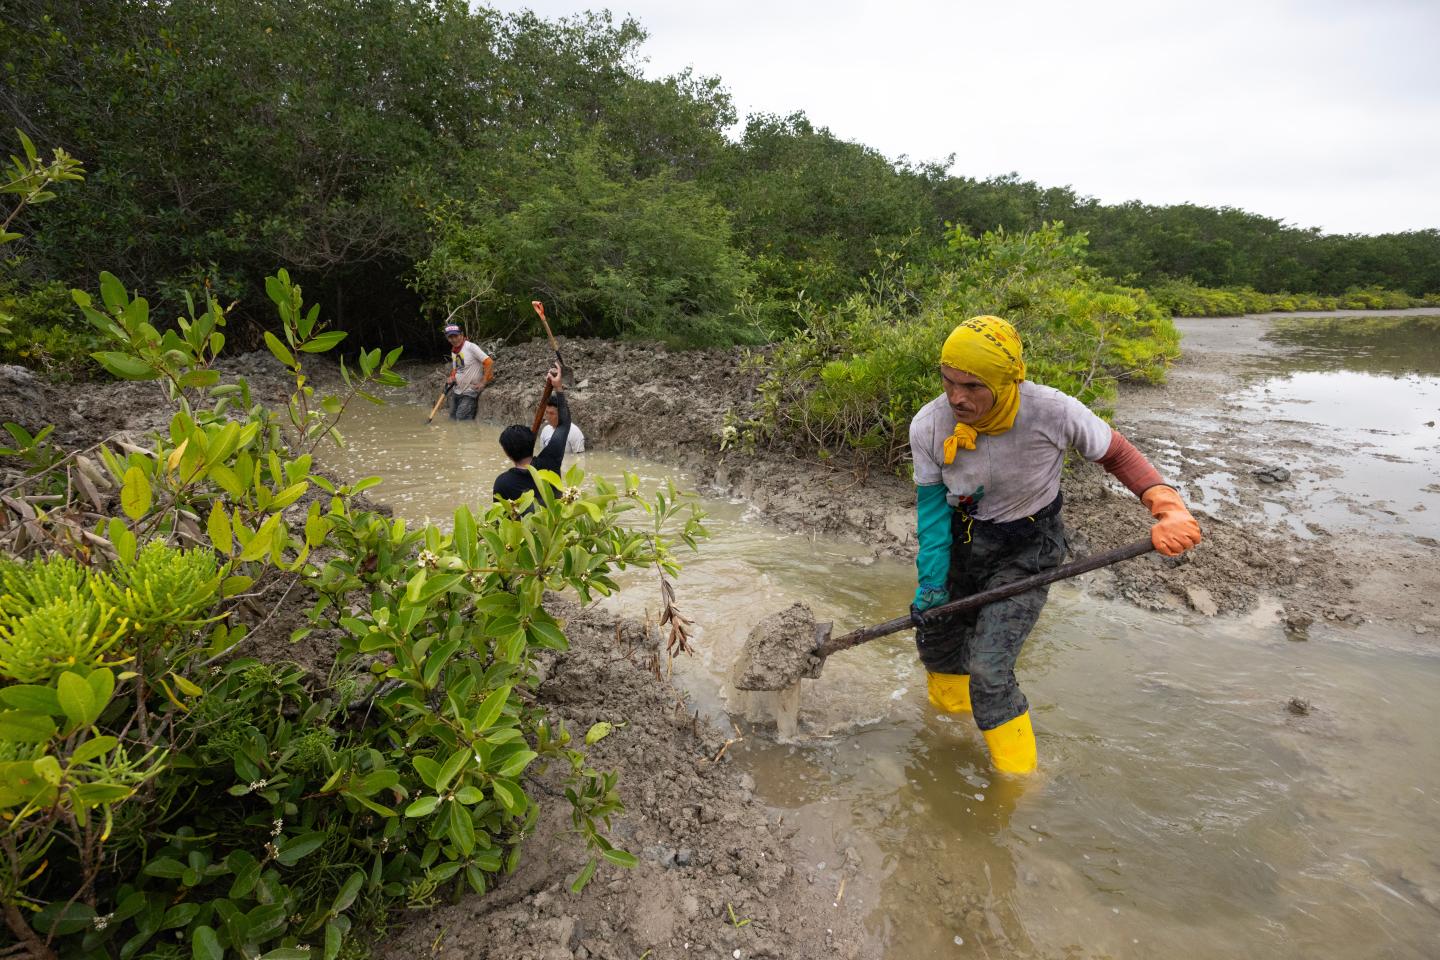 Crabbers in Ecuador digging a trench to connect water to the mangrove forest